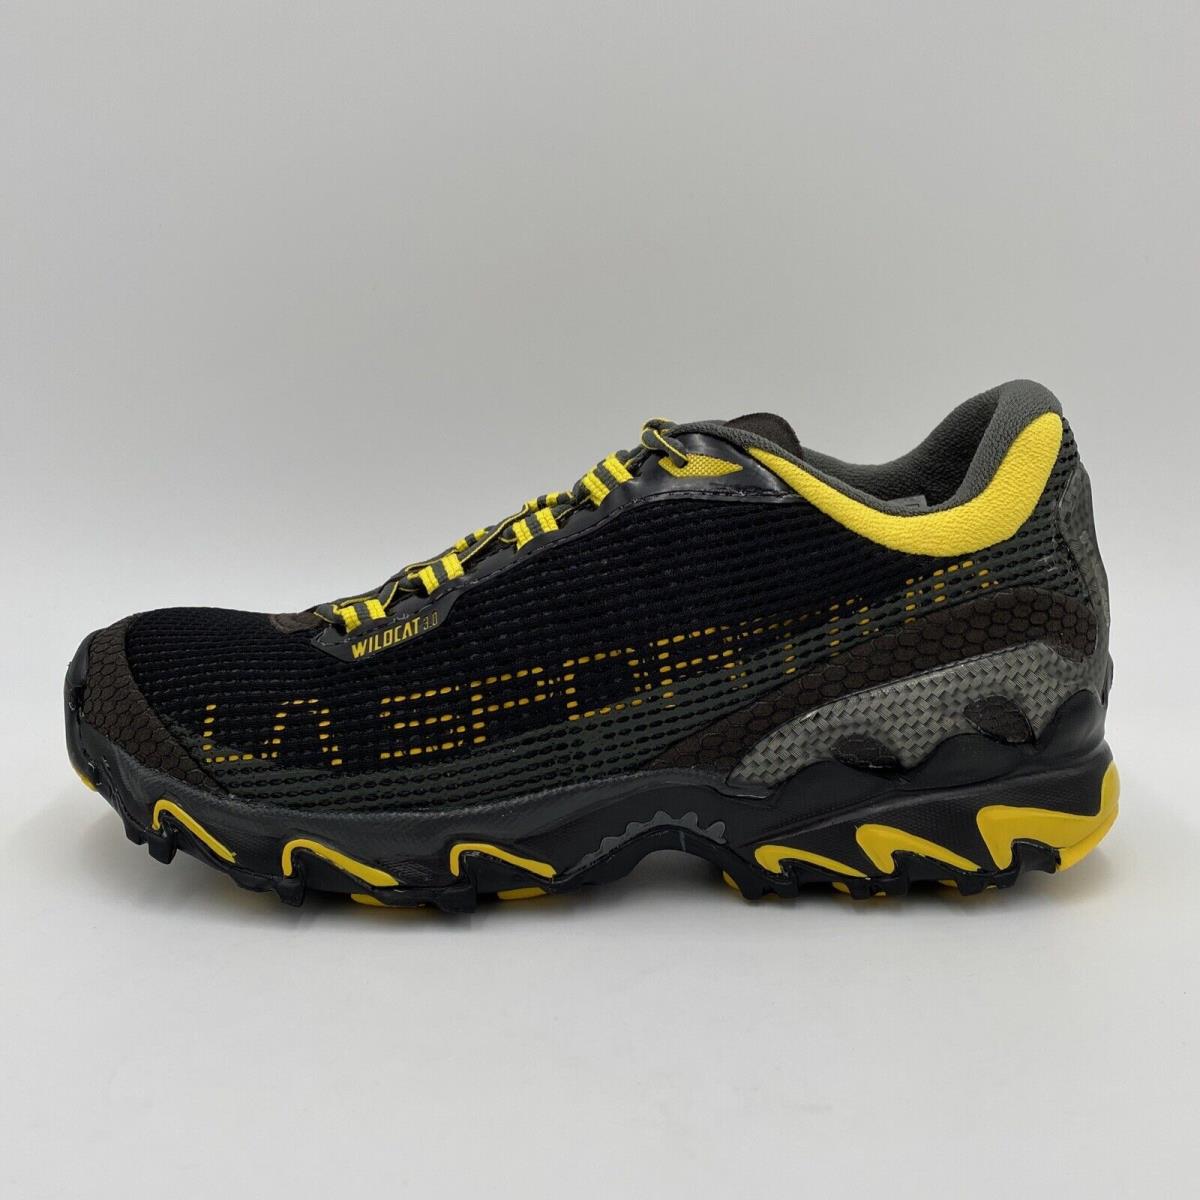 La Sportiva Mens Wildcat 3.0 Mountain Running Shoes 260BY Black/yellow Size 9.5